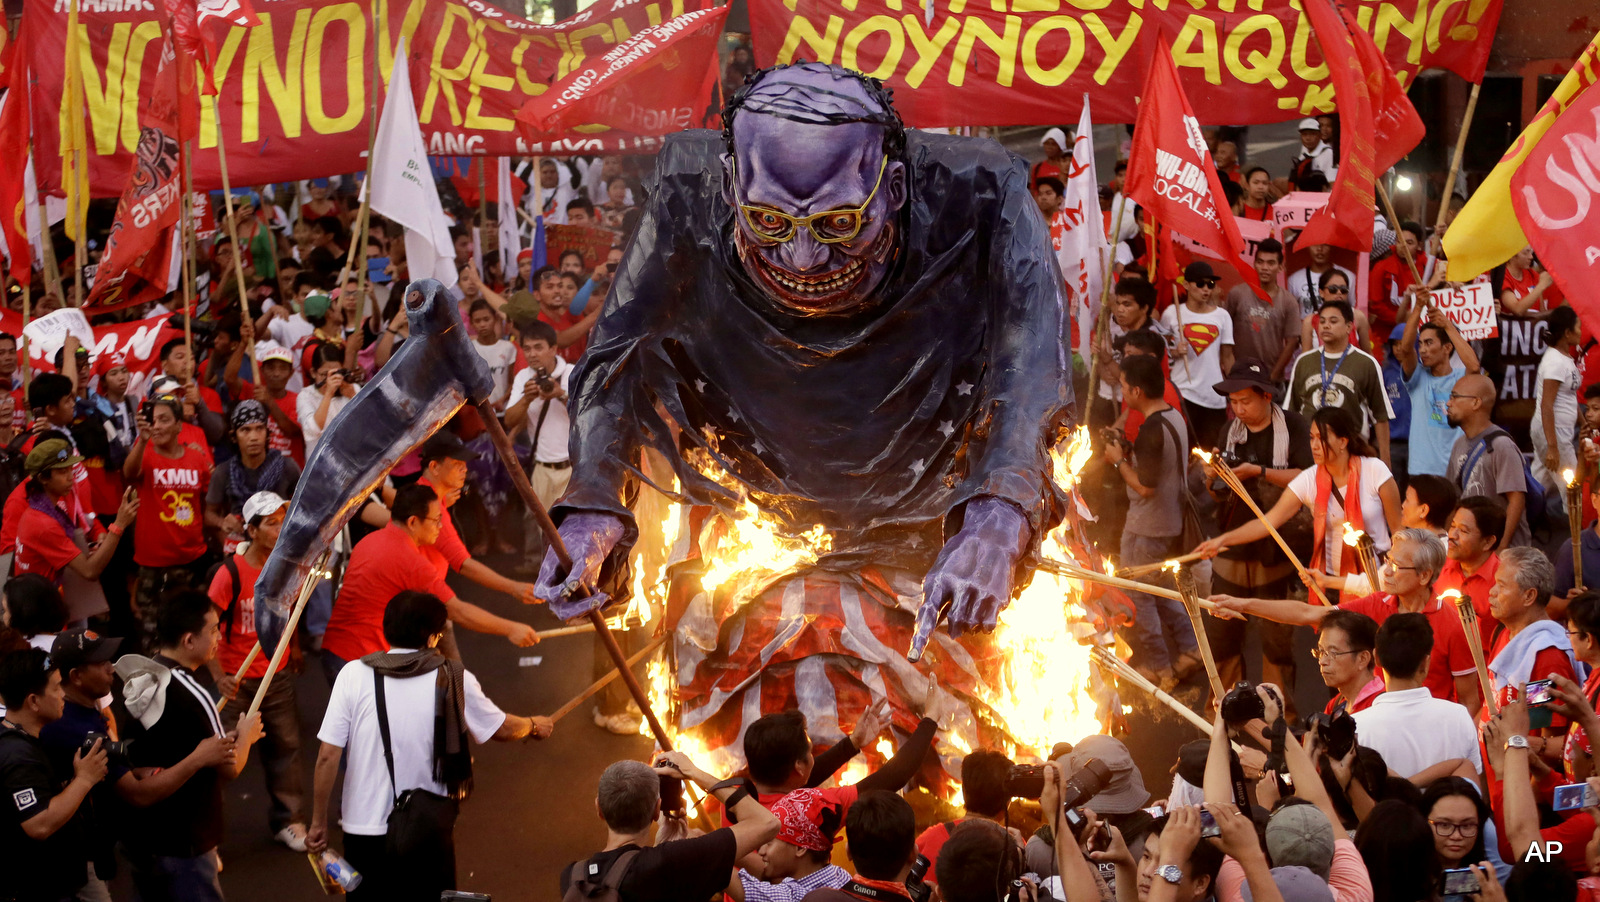 Protesters, mostly workers, set on fire to an effigy of Philippine President Benigno Aquino III during a rally near the Presidential Palace in Manila to mark May Day Friday, May 1, 2015, a national holiday in the Philippines. Thousands of workers converged near the palace to call for the resignation of Aquino, demand higher wages, better working conditions, fair export labor policies and a halt to contractualization. The sign reads: Oust Noynoy Aquino! 